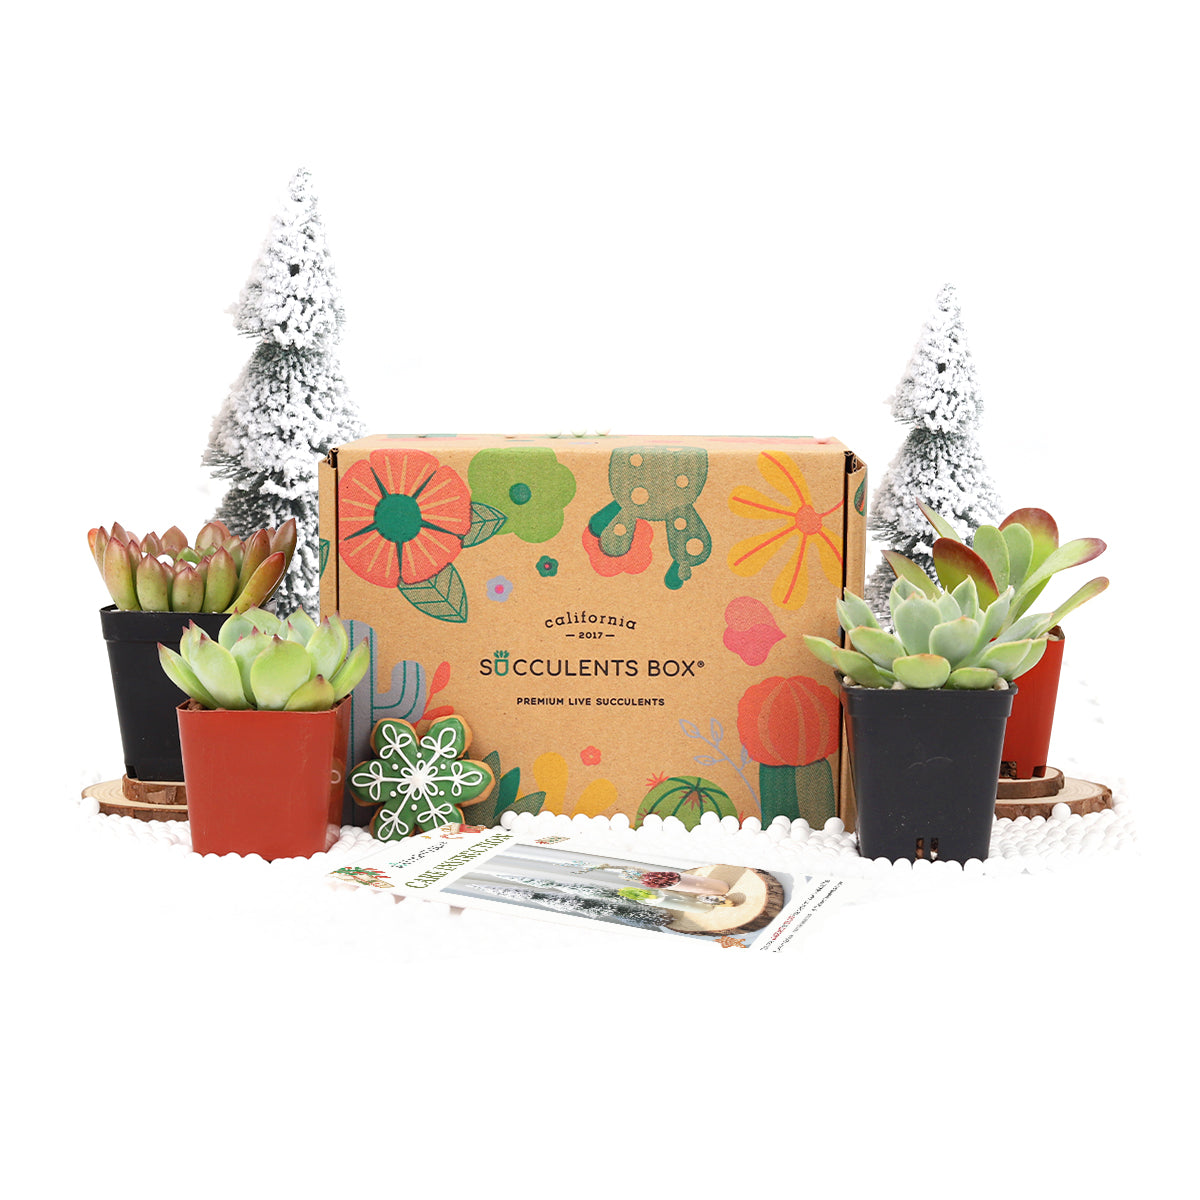 Succulents and Cactus Plants, Air plant box for sale, Air Plant Subscription Box with Care Instruction, subscription box, subscription boxes